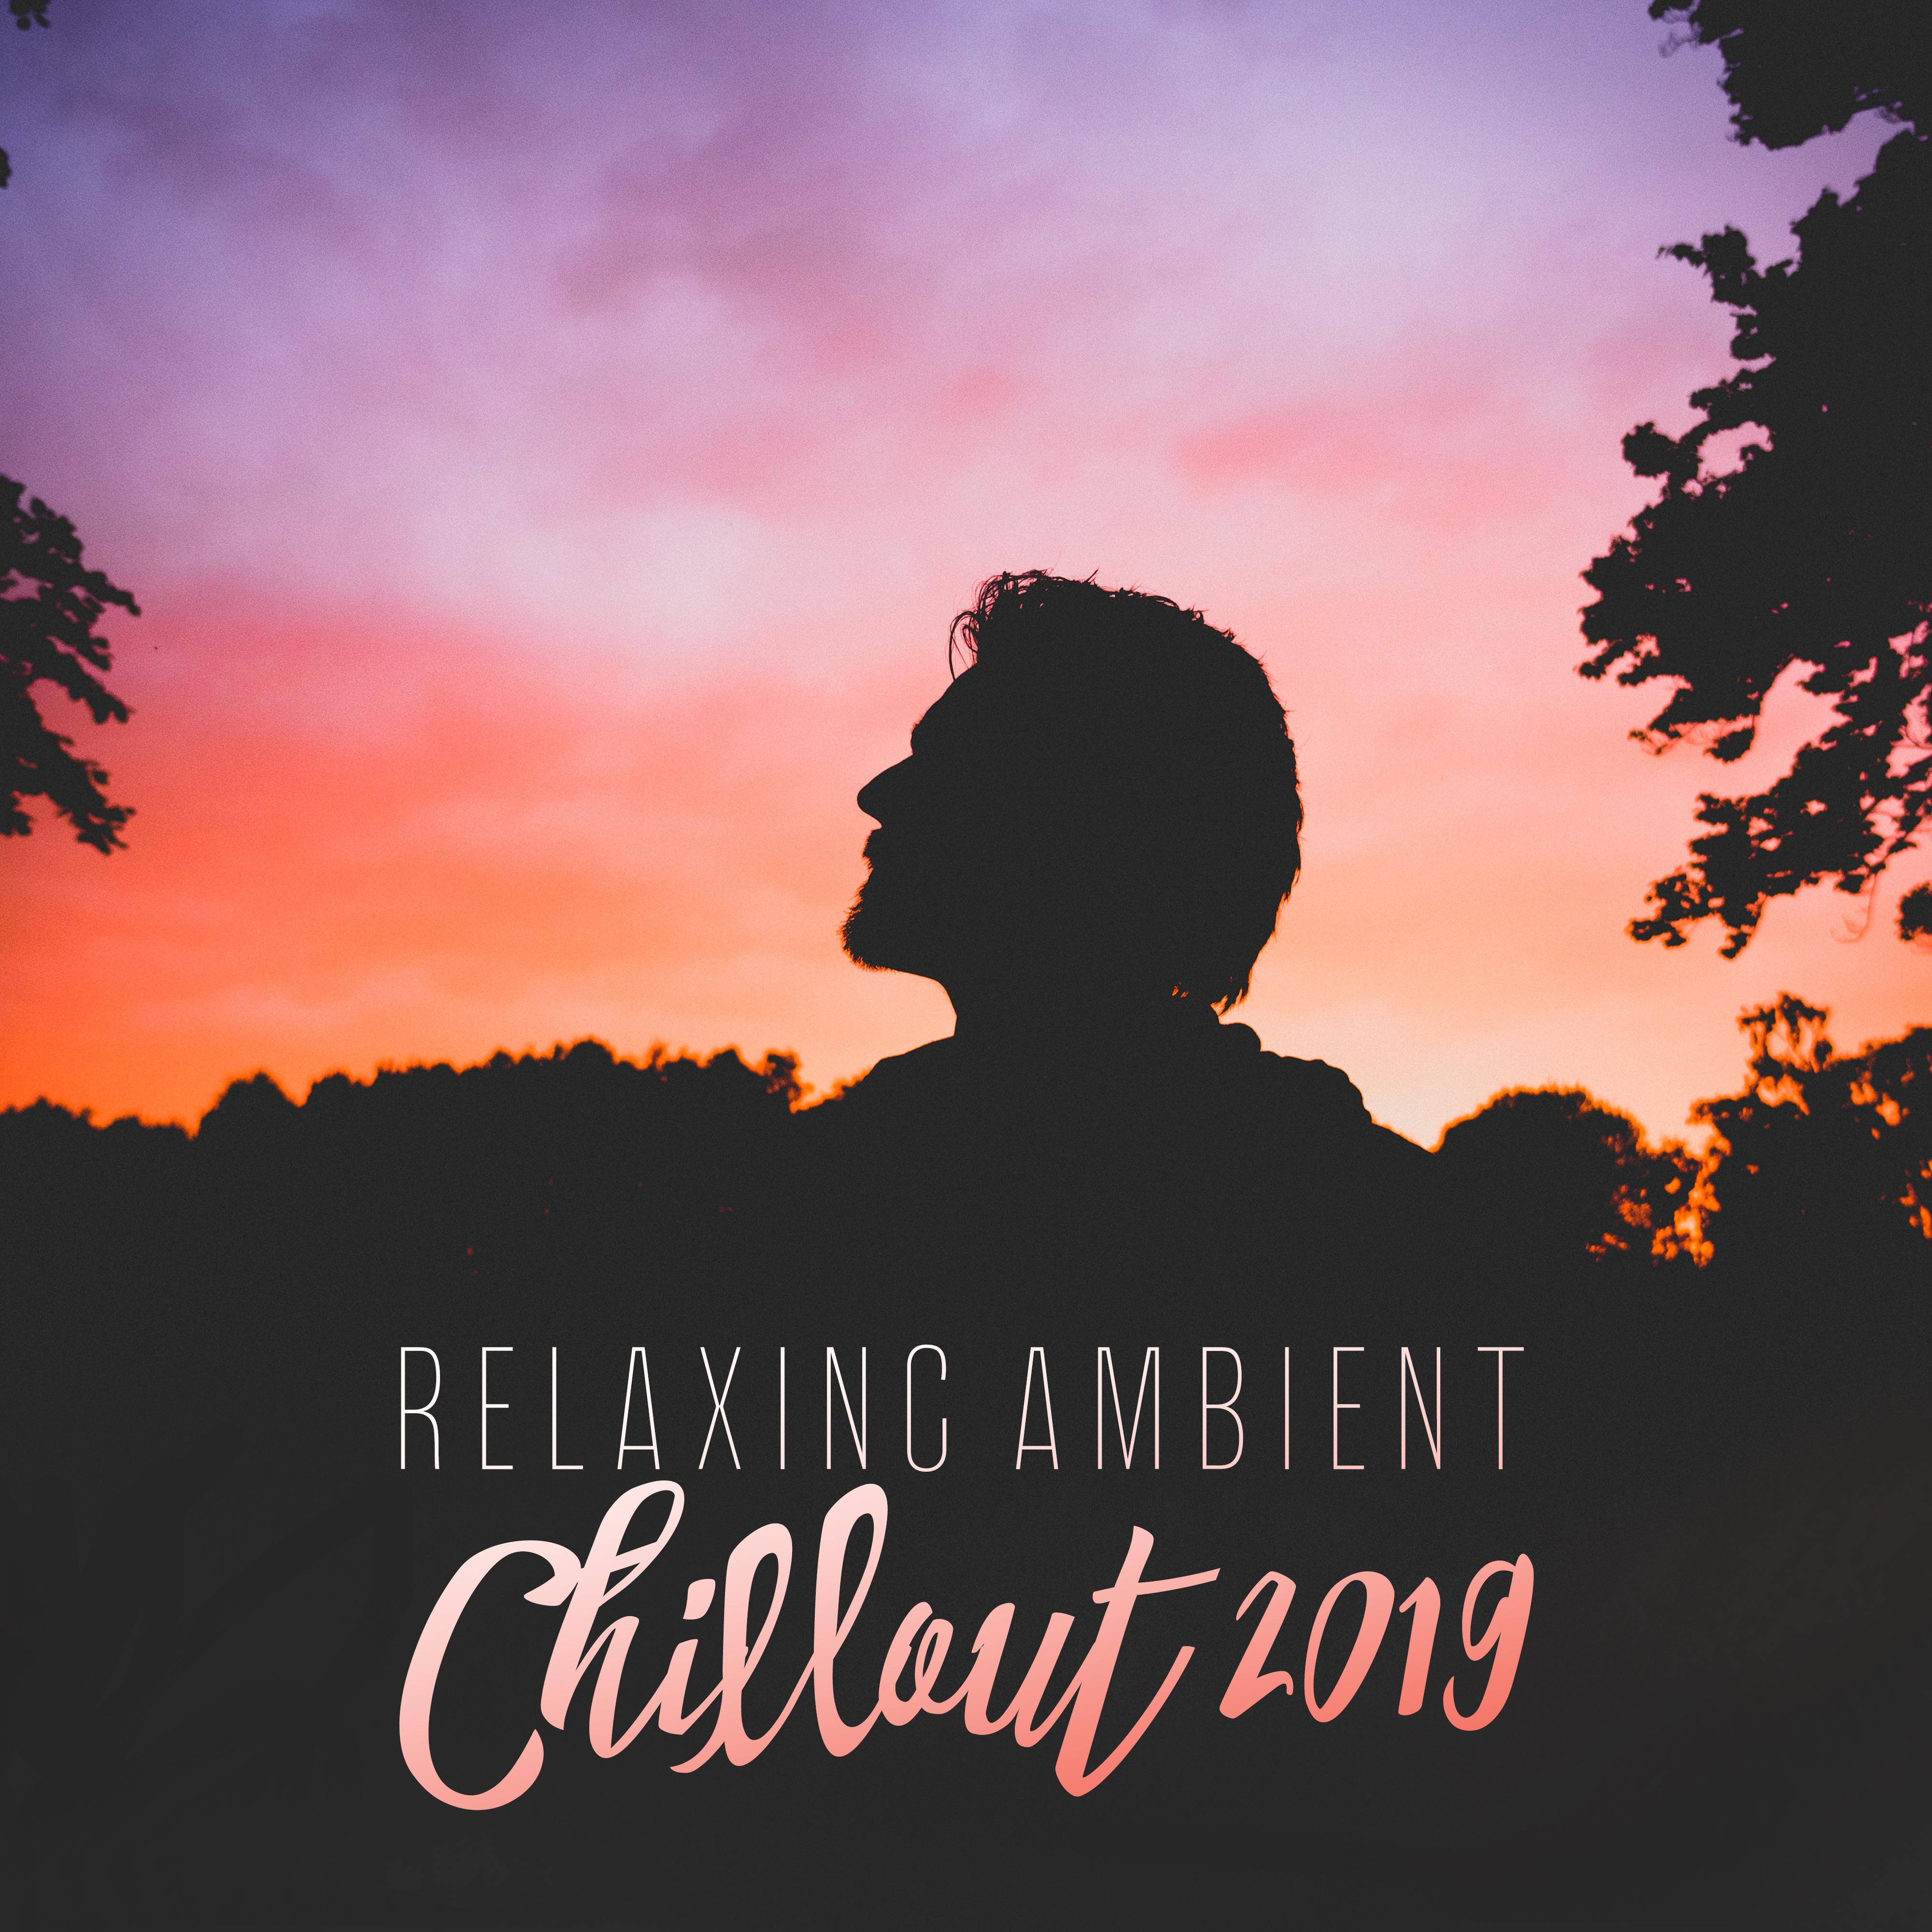 Relaxing Ambient Chillout 2019 – Ibiza Chill Out, Chillout Relaxing Melodies, Beach Lounge, Deep Chill Vibes, Summertime 2019, Reduce Stress, Ambient Music